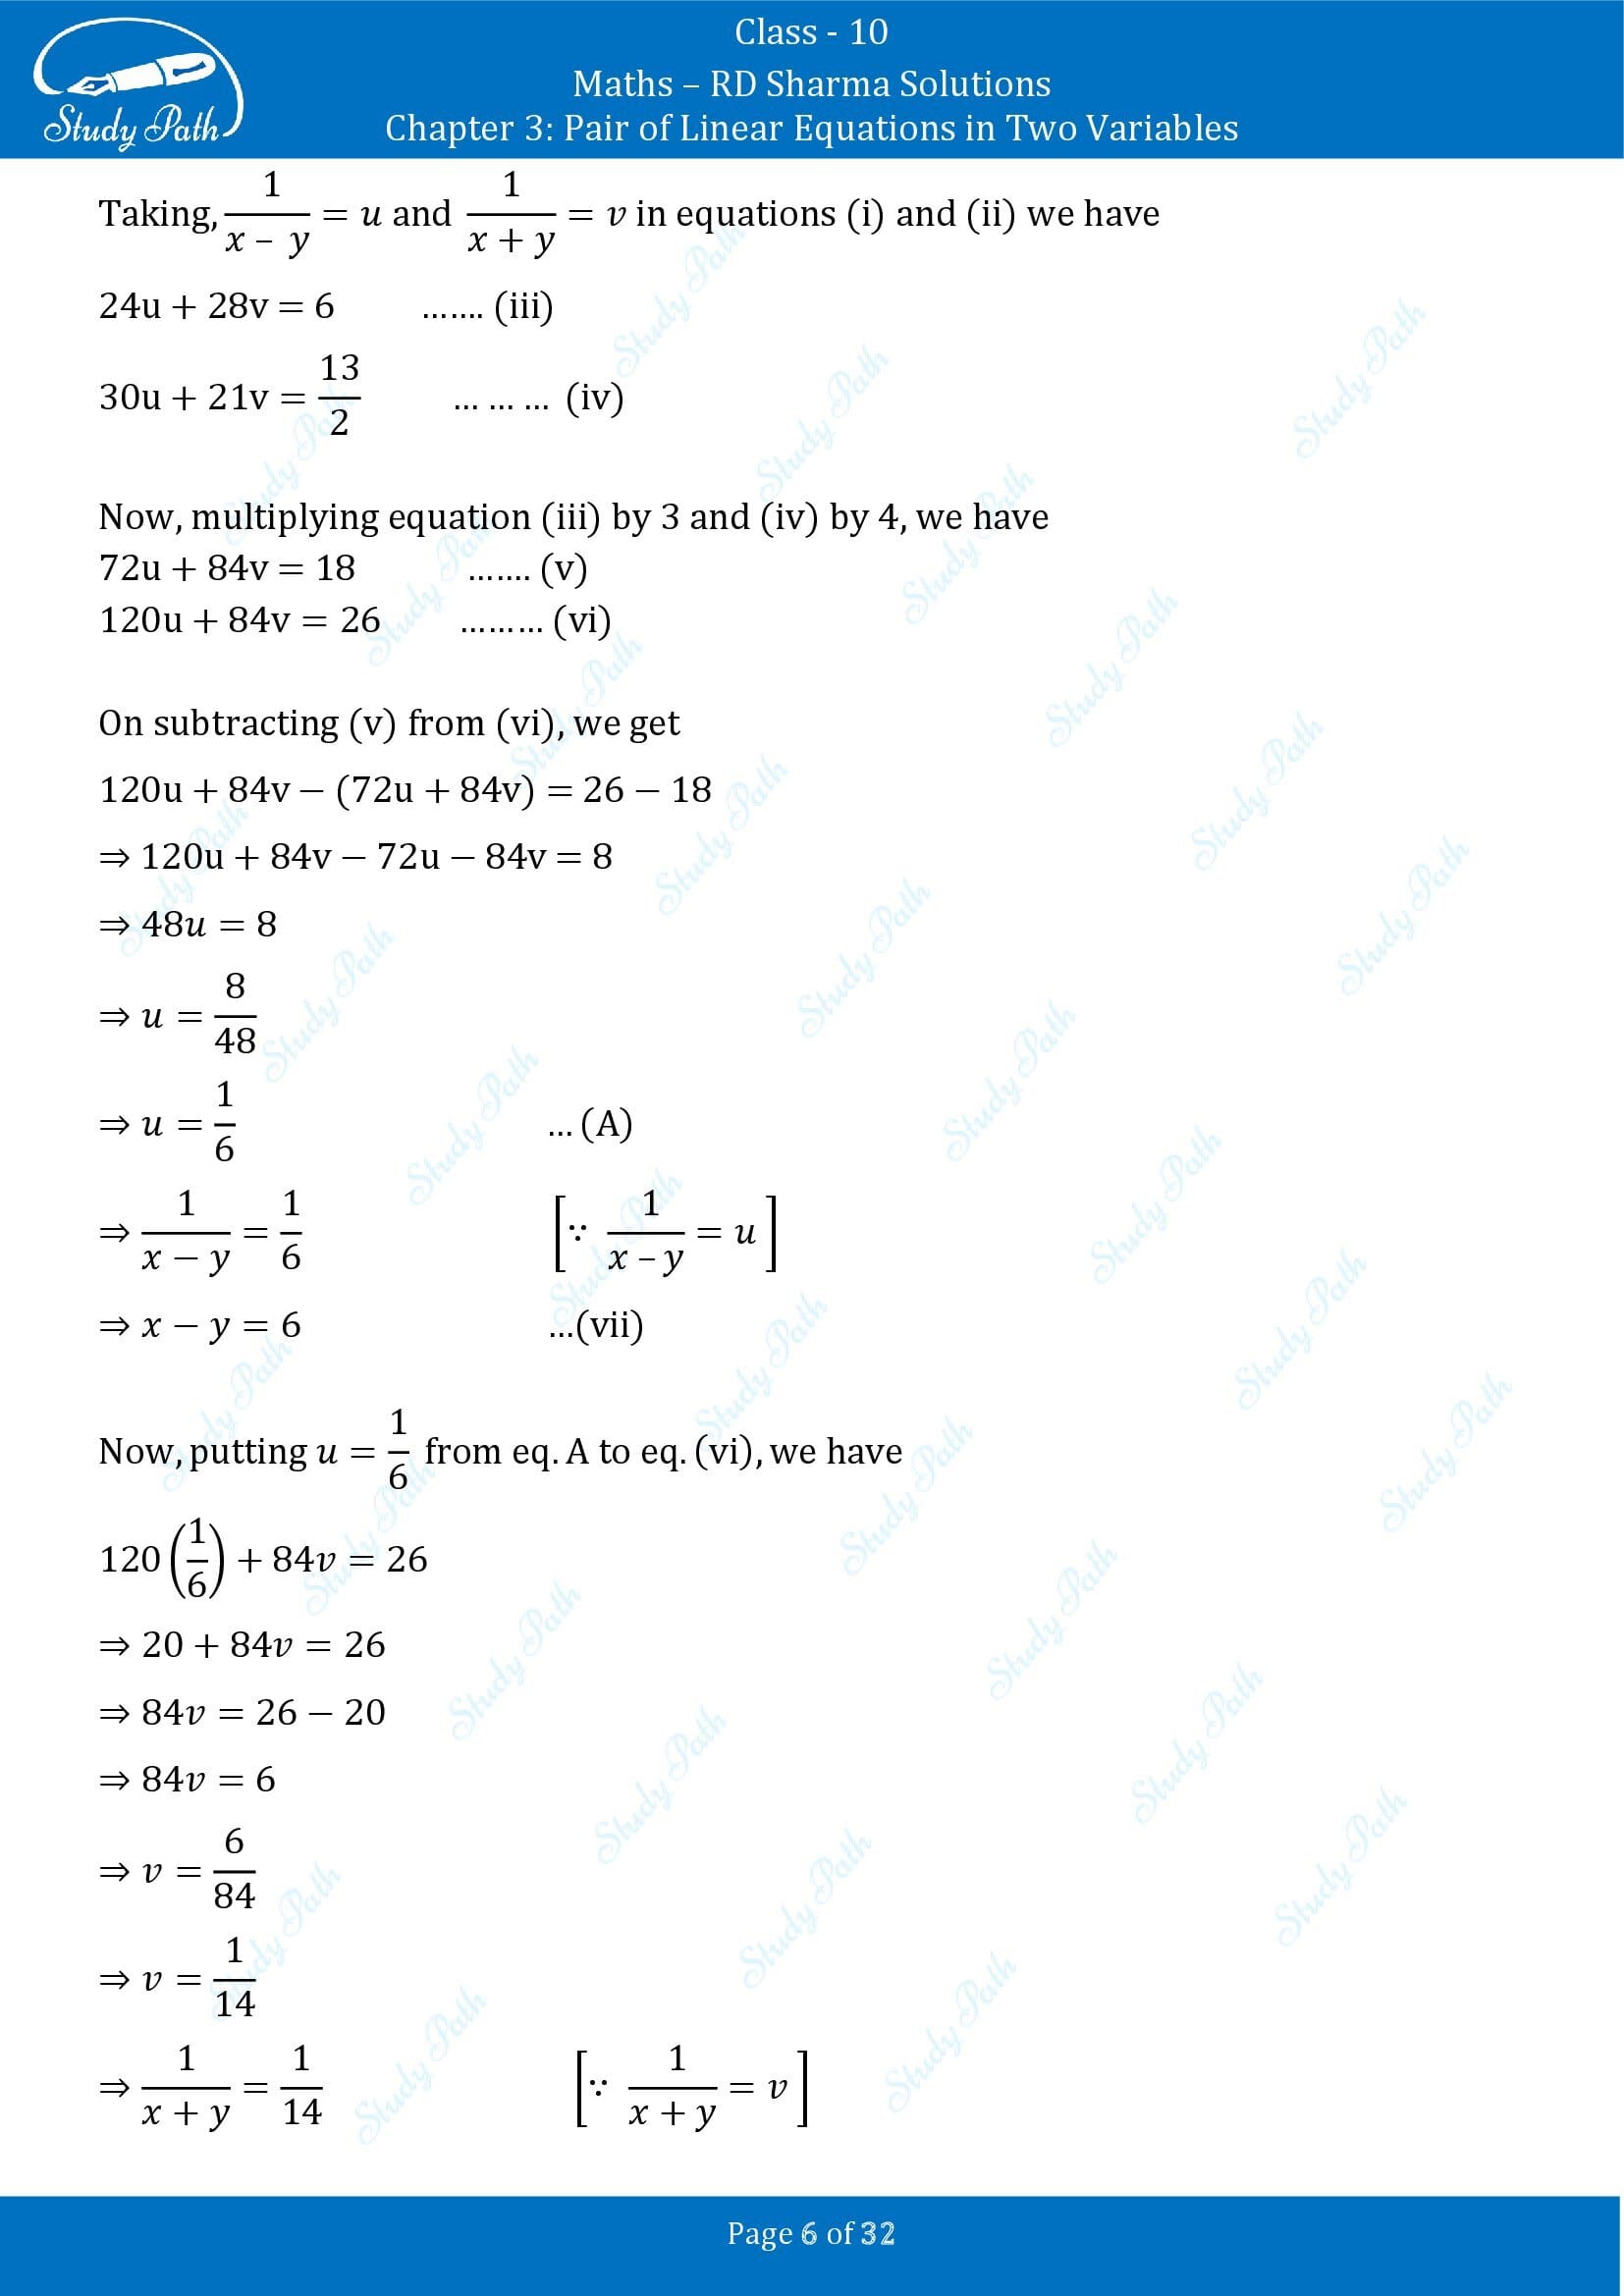 RD Sharma Solutions Class 10 Chapter 3 Pair of Linear Equations in Two Variables Exercise 3.10 00006